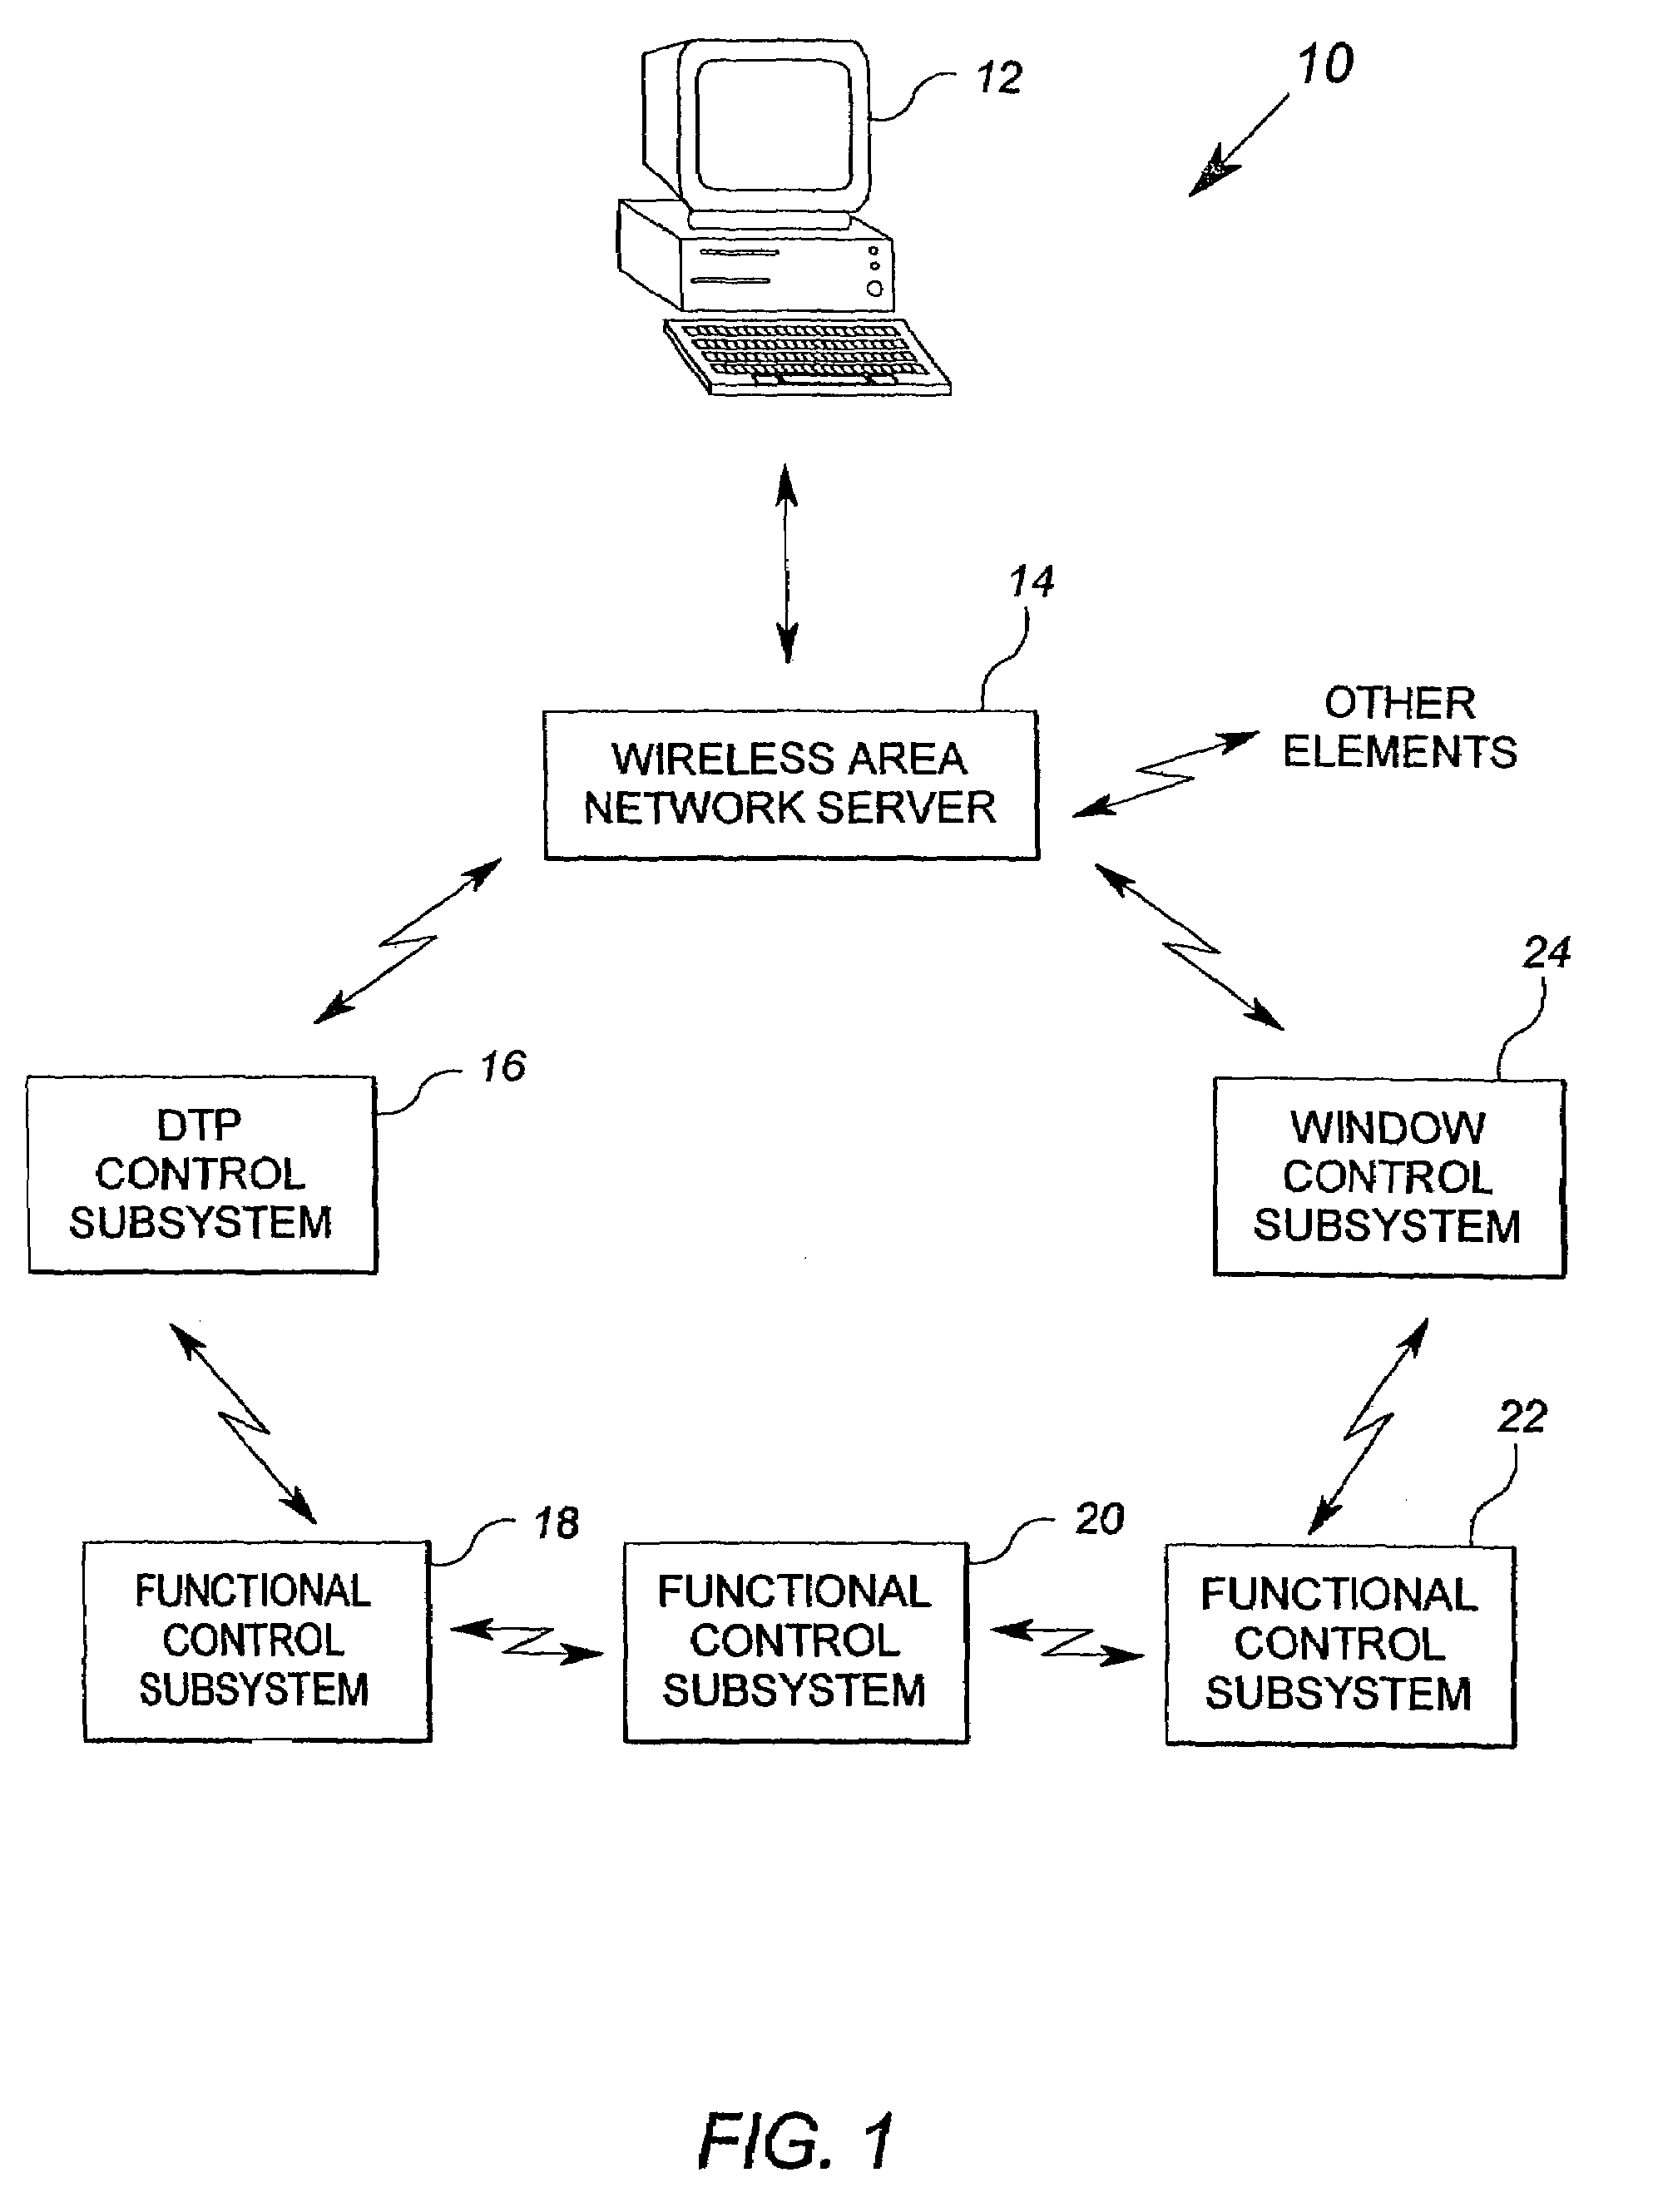 Method and apparatus for graphically displaying a building system